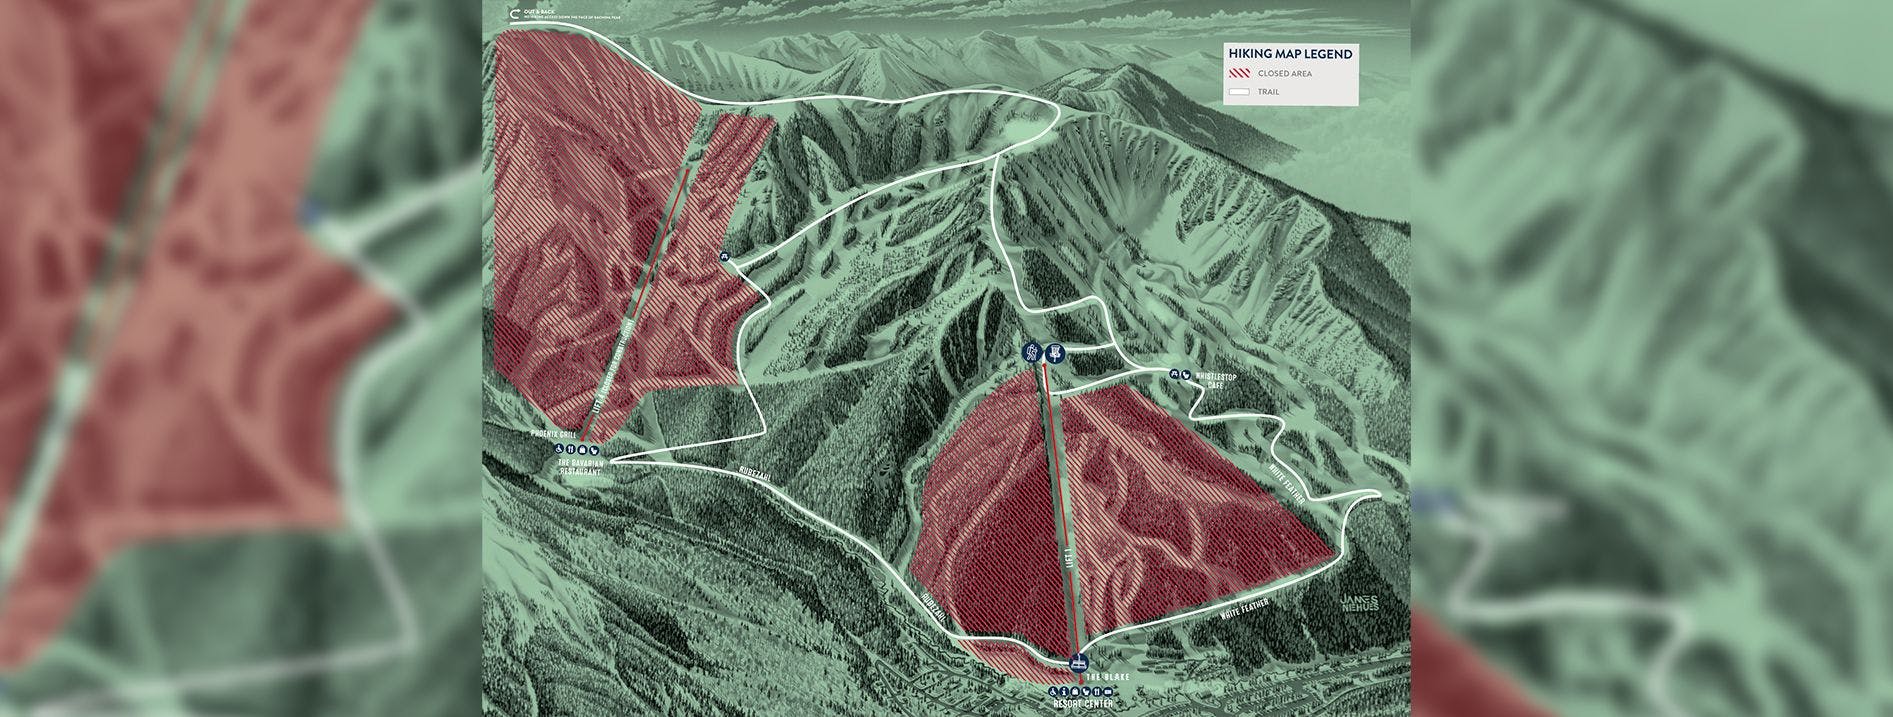 map of hiking trails within TAOS Ski Valley boundaries